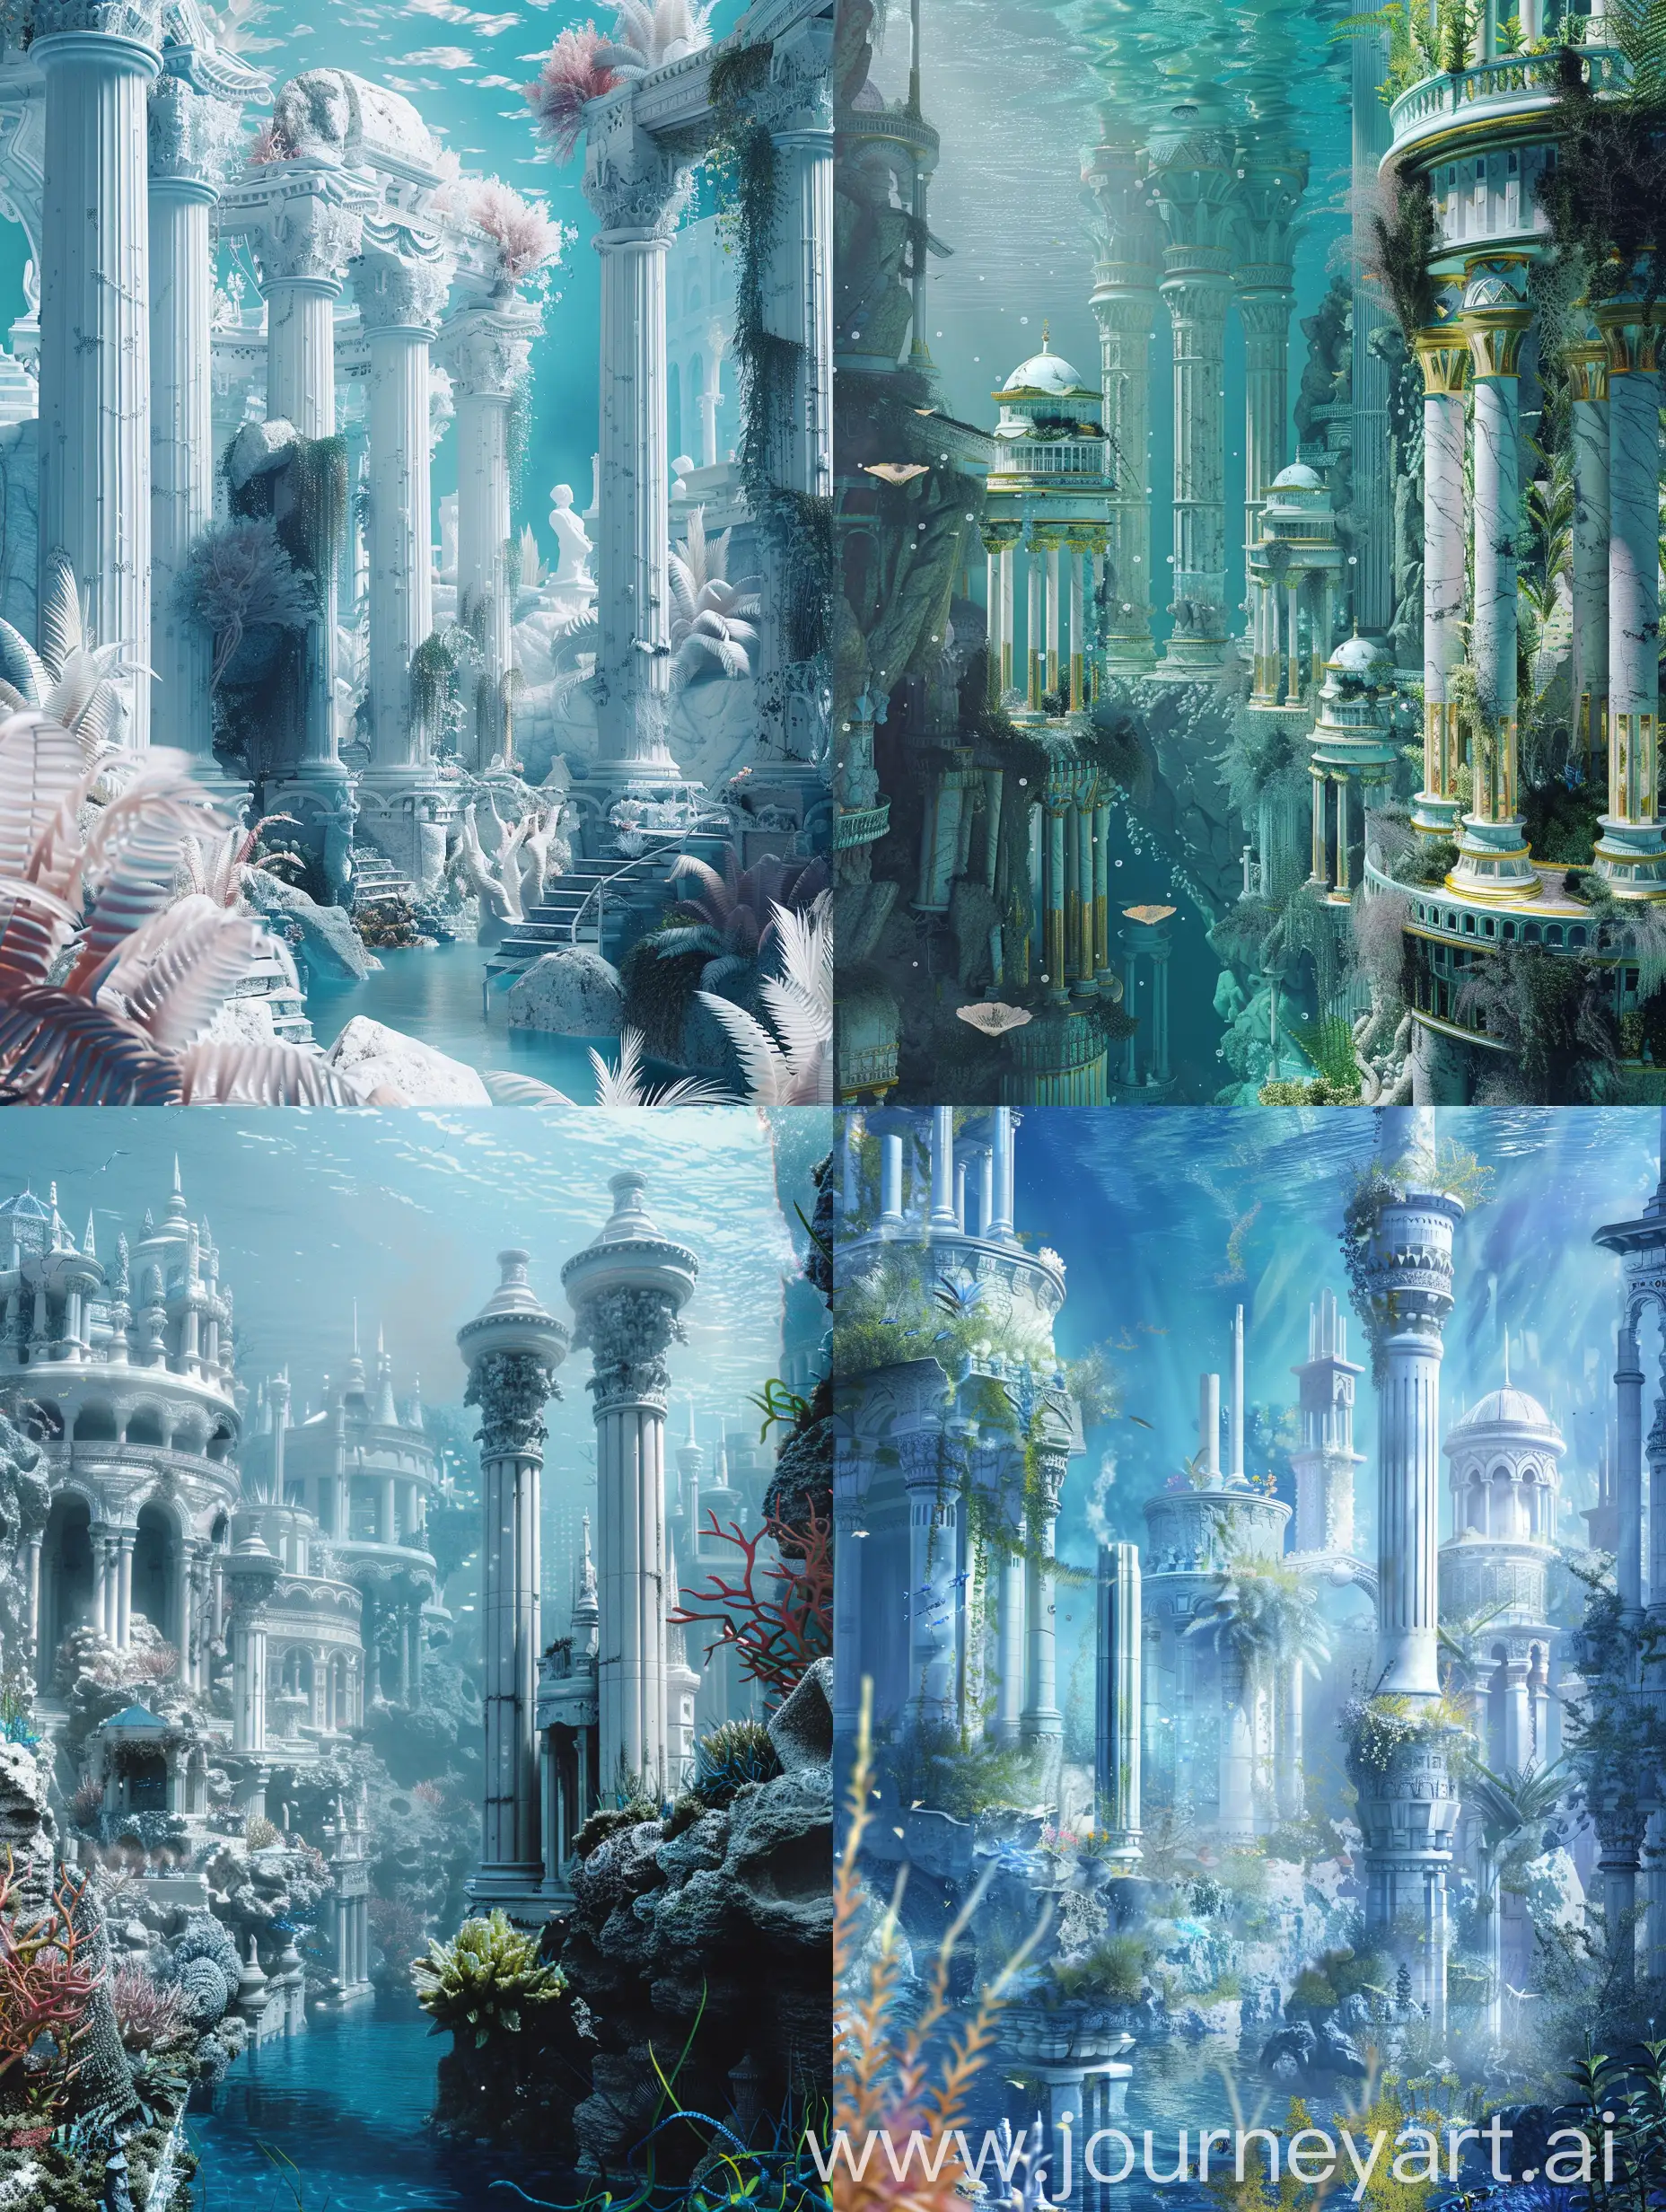 Magical underwater city, white marble, towers, plants, seaweed, ancient roman architecture, town Fair, lighthouse, fantasy style, white and blue columns